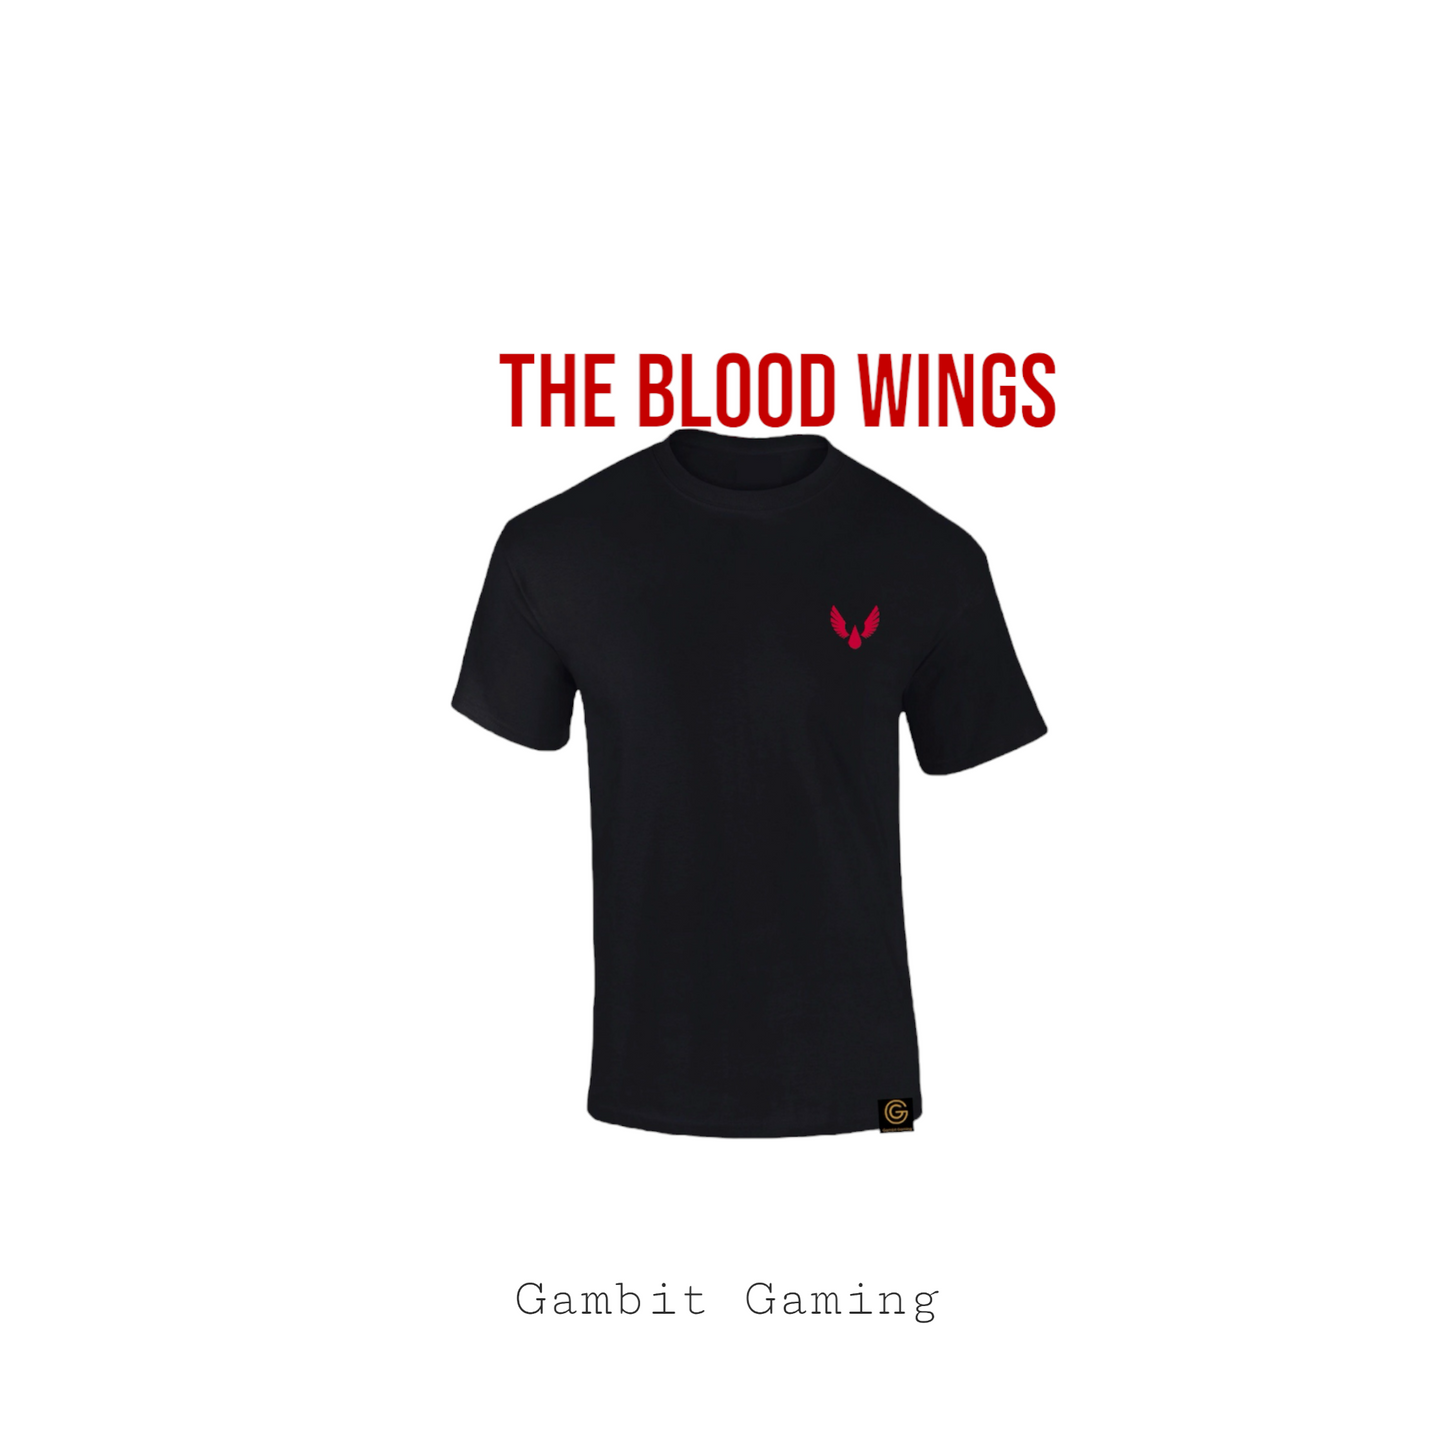 The Blood Wings